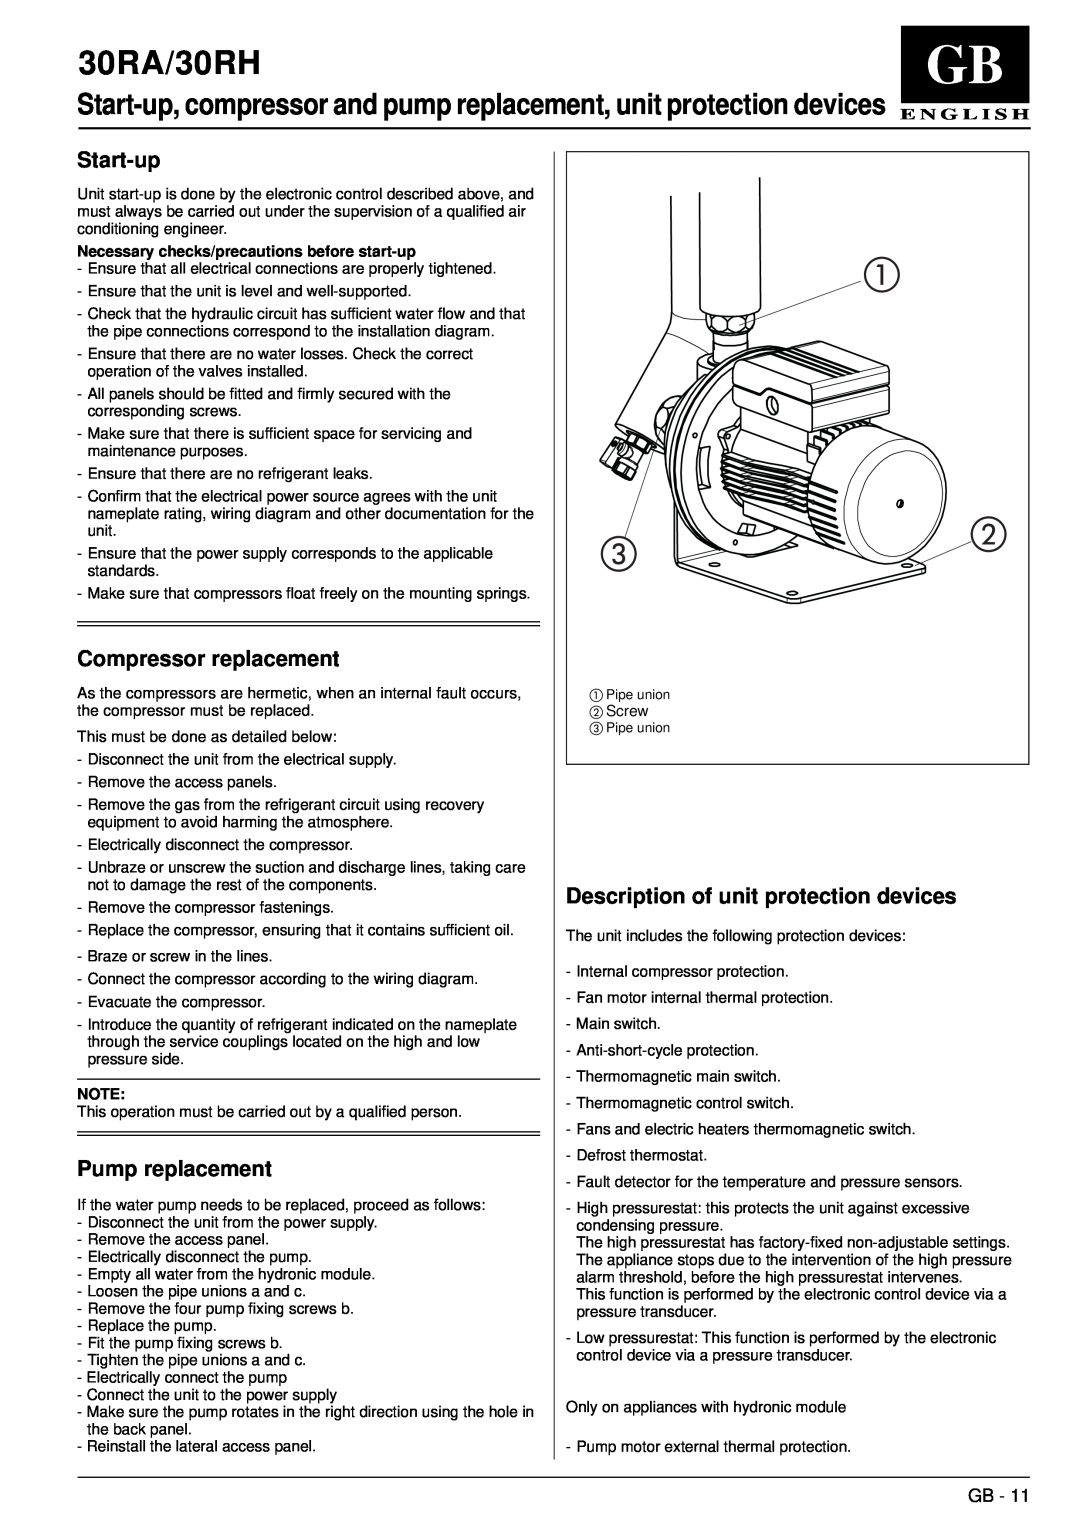 Carrier manual 30RA/30RH, Start-up, Compressor replacement, Pump replacement, Description of unit protection devices, Gb 